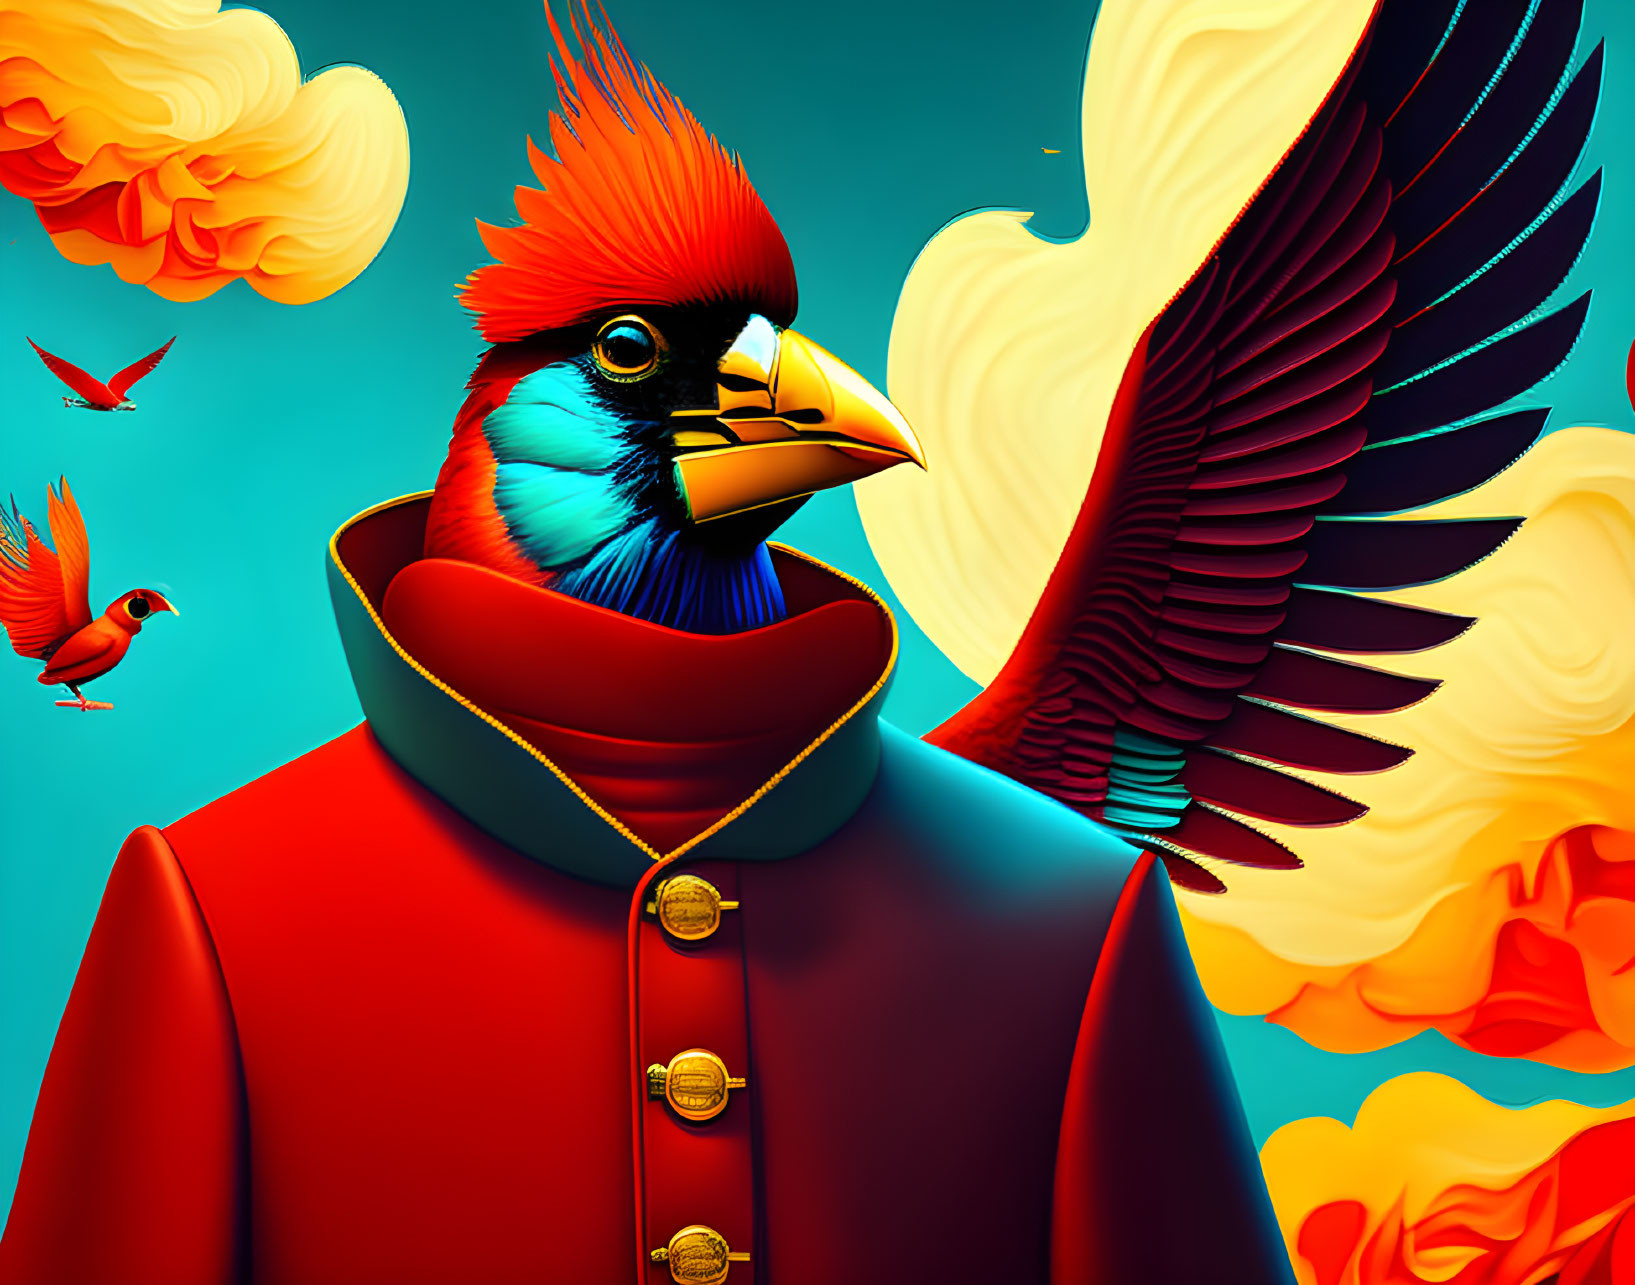 Colorful digital artwork: stylized cardinal bird in red coat on sky-blue background